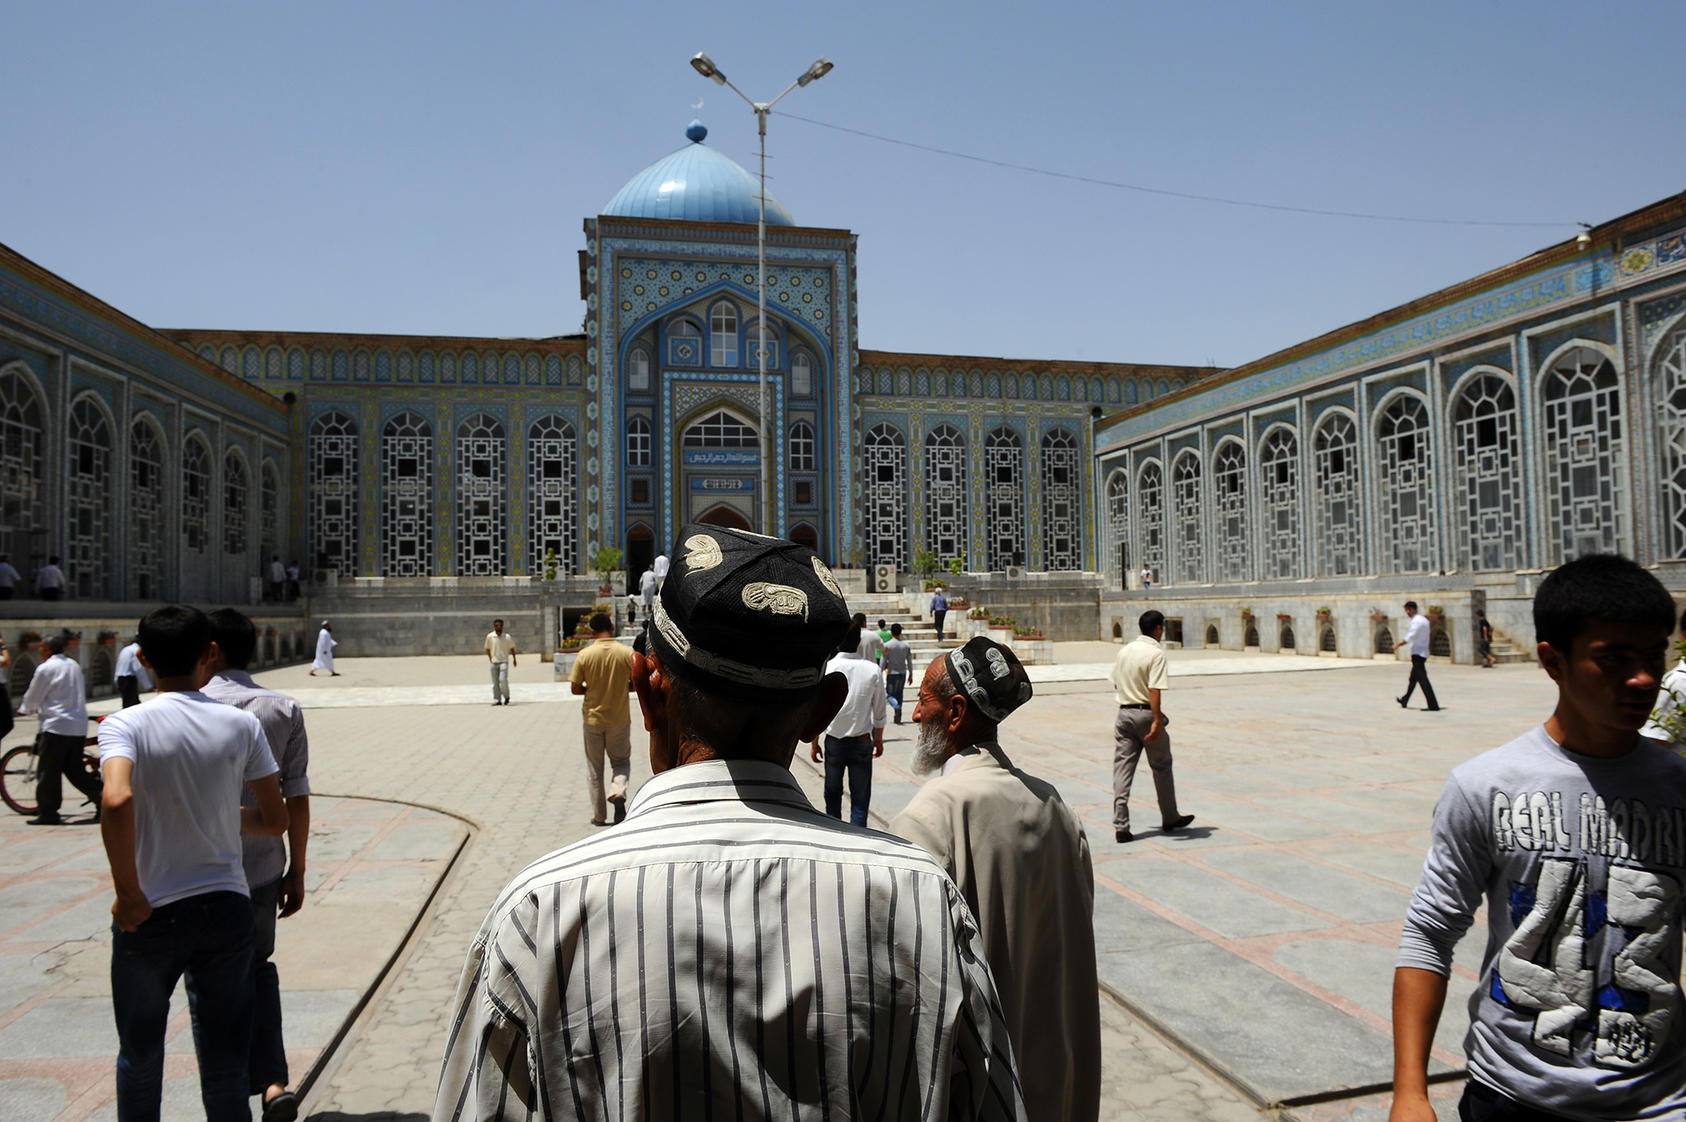 The central mosque in Dushanbe, the capital of Tajikistan, on July 1, 2011. As many as two thousand Tajik citizens traveled to Iraq and Syria to live and fight with ISIS. (James Hill/New York Times)